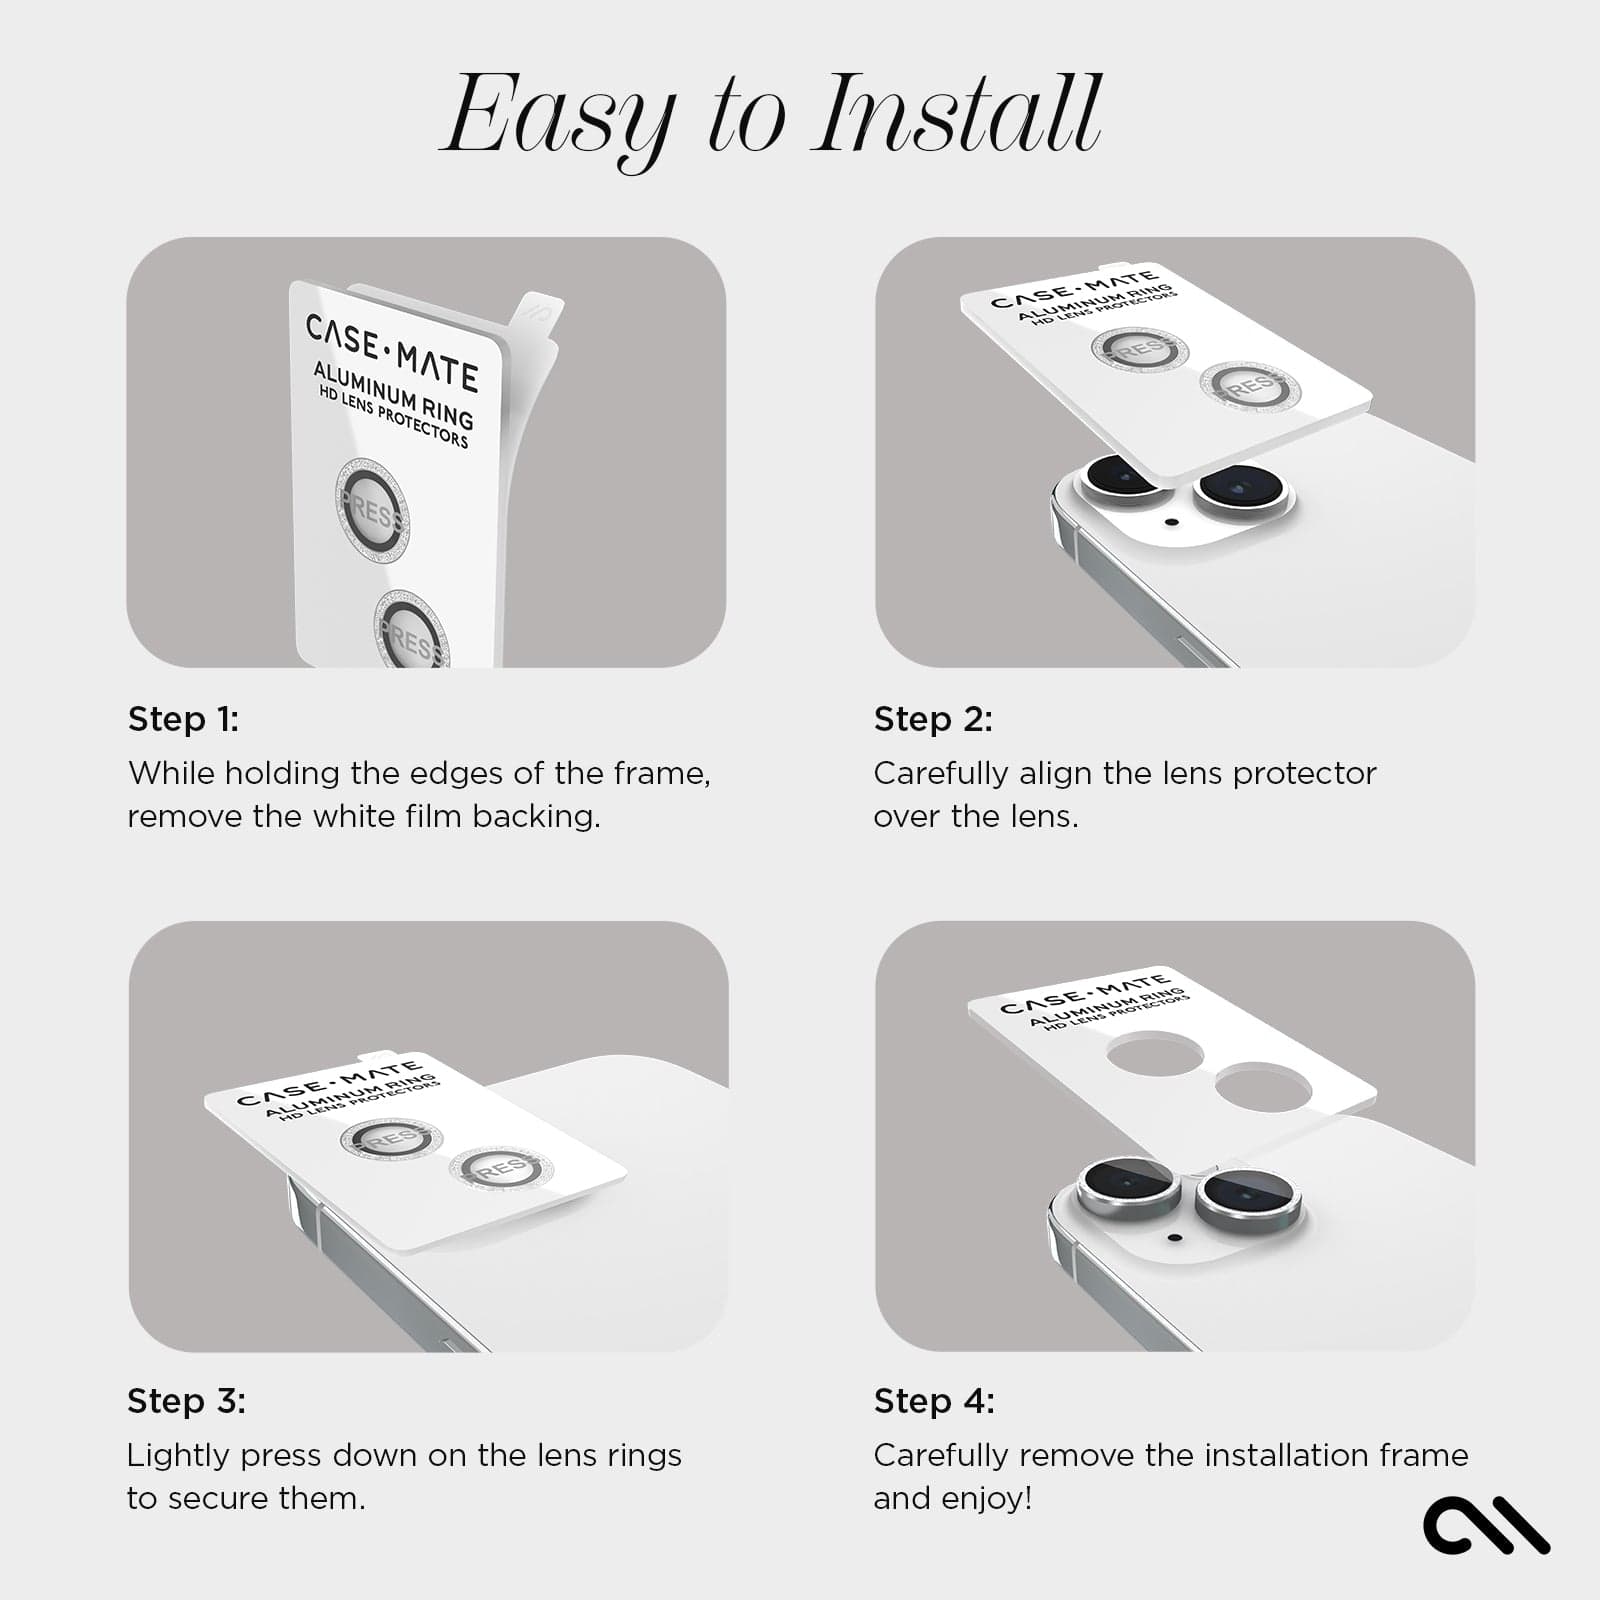 EASY TO INSTALL